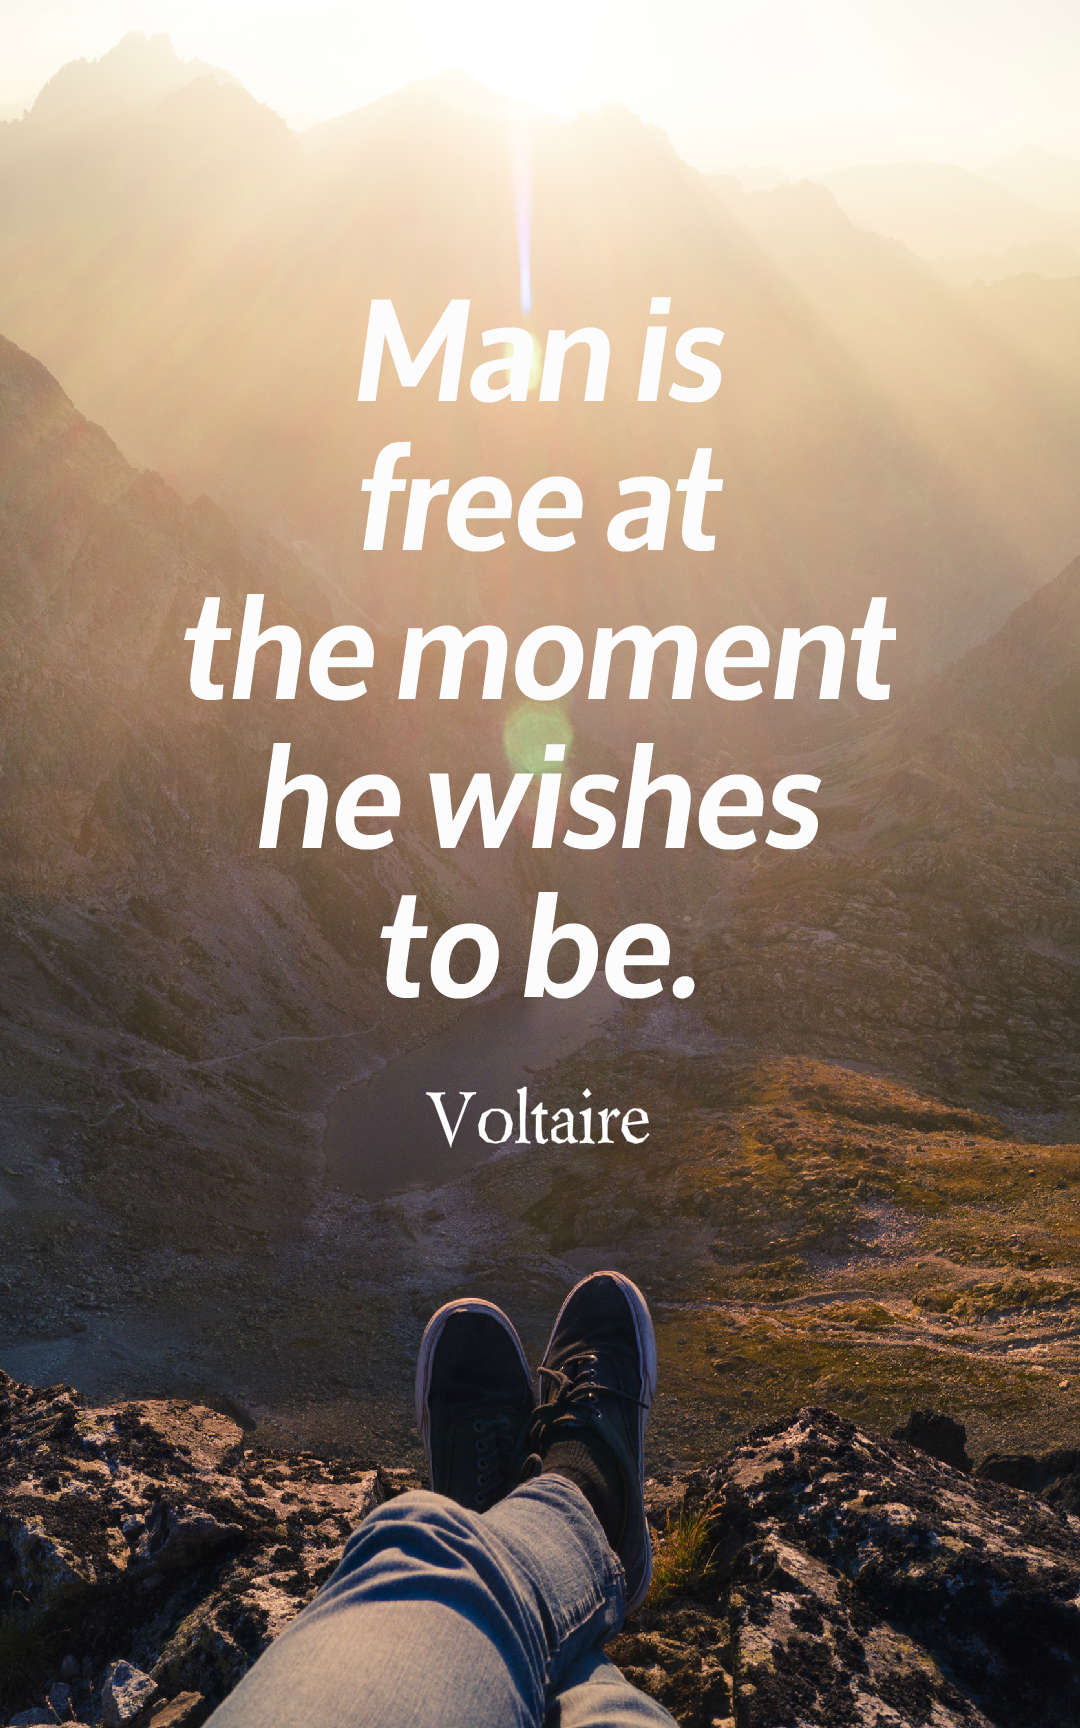 Man is free at the moment he wishes to be.